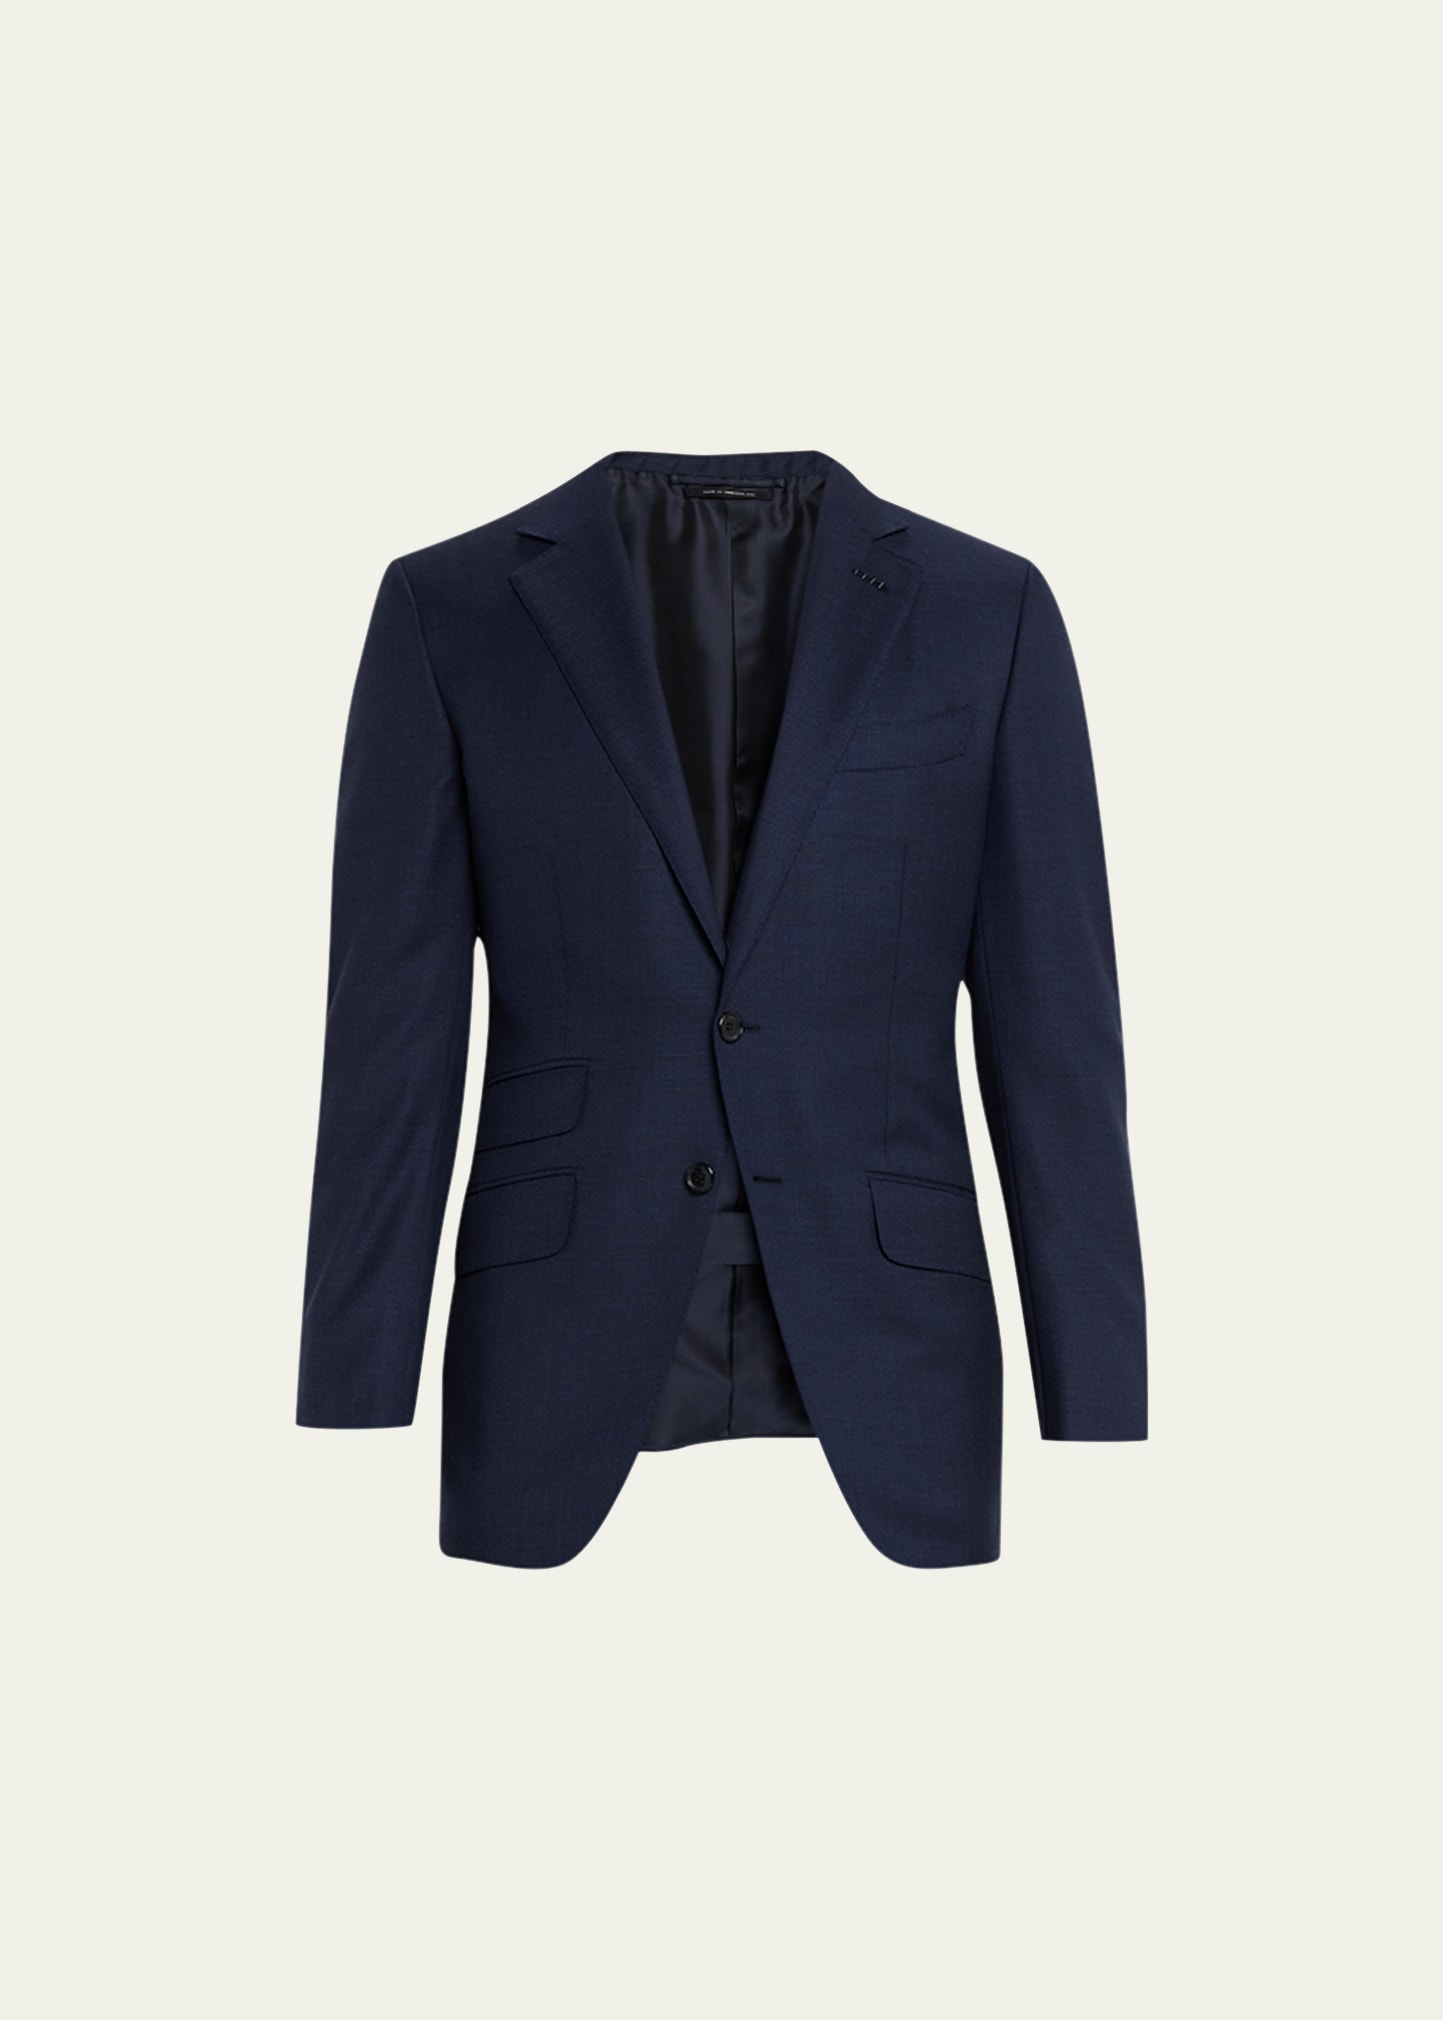 TOM FORD MEN'S O'CONNOR MICRO-STRUCTURED SUIT